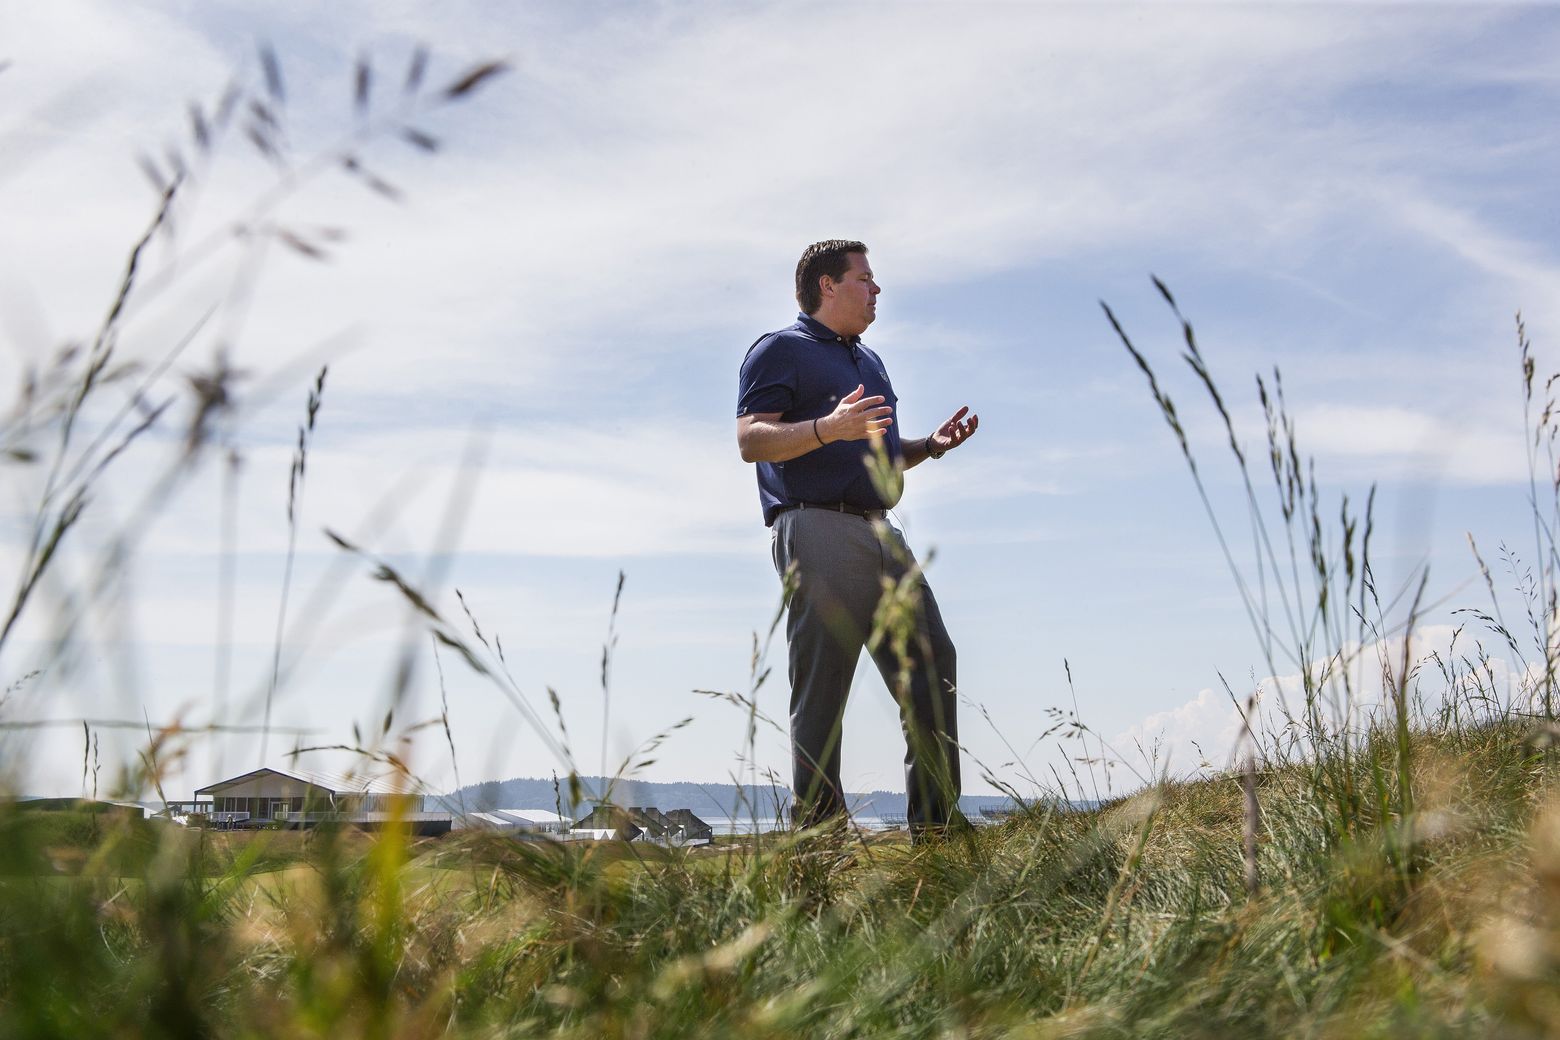 U.S. Open tournament director Danny Sink stands at Chambers Bay, which will feature four strains of fescue grass. The grass is expected to affect how the balls are played. (Dean Rutz/The Seattle Times)